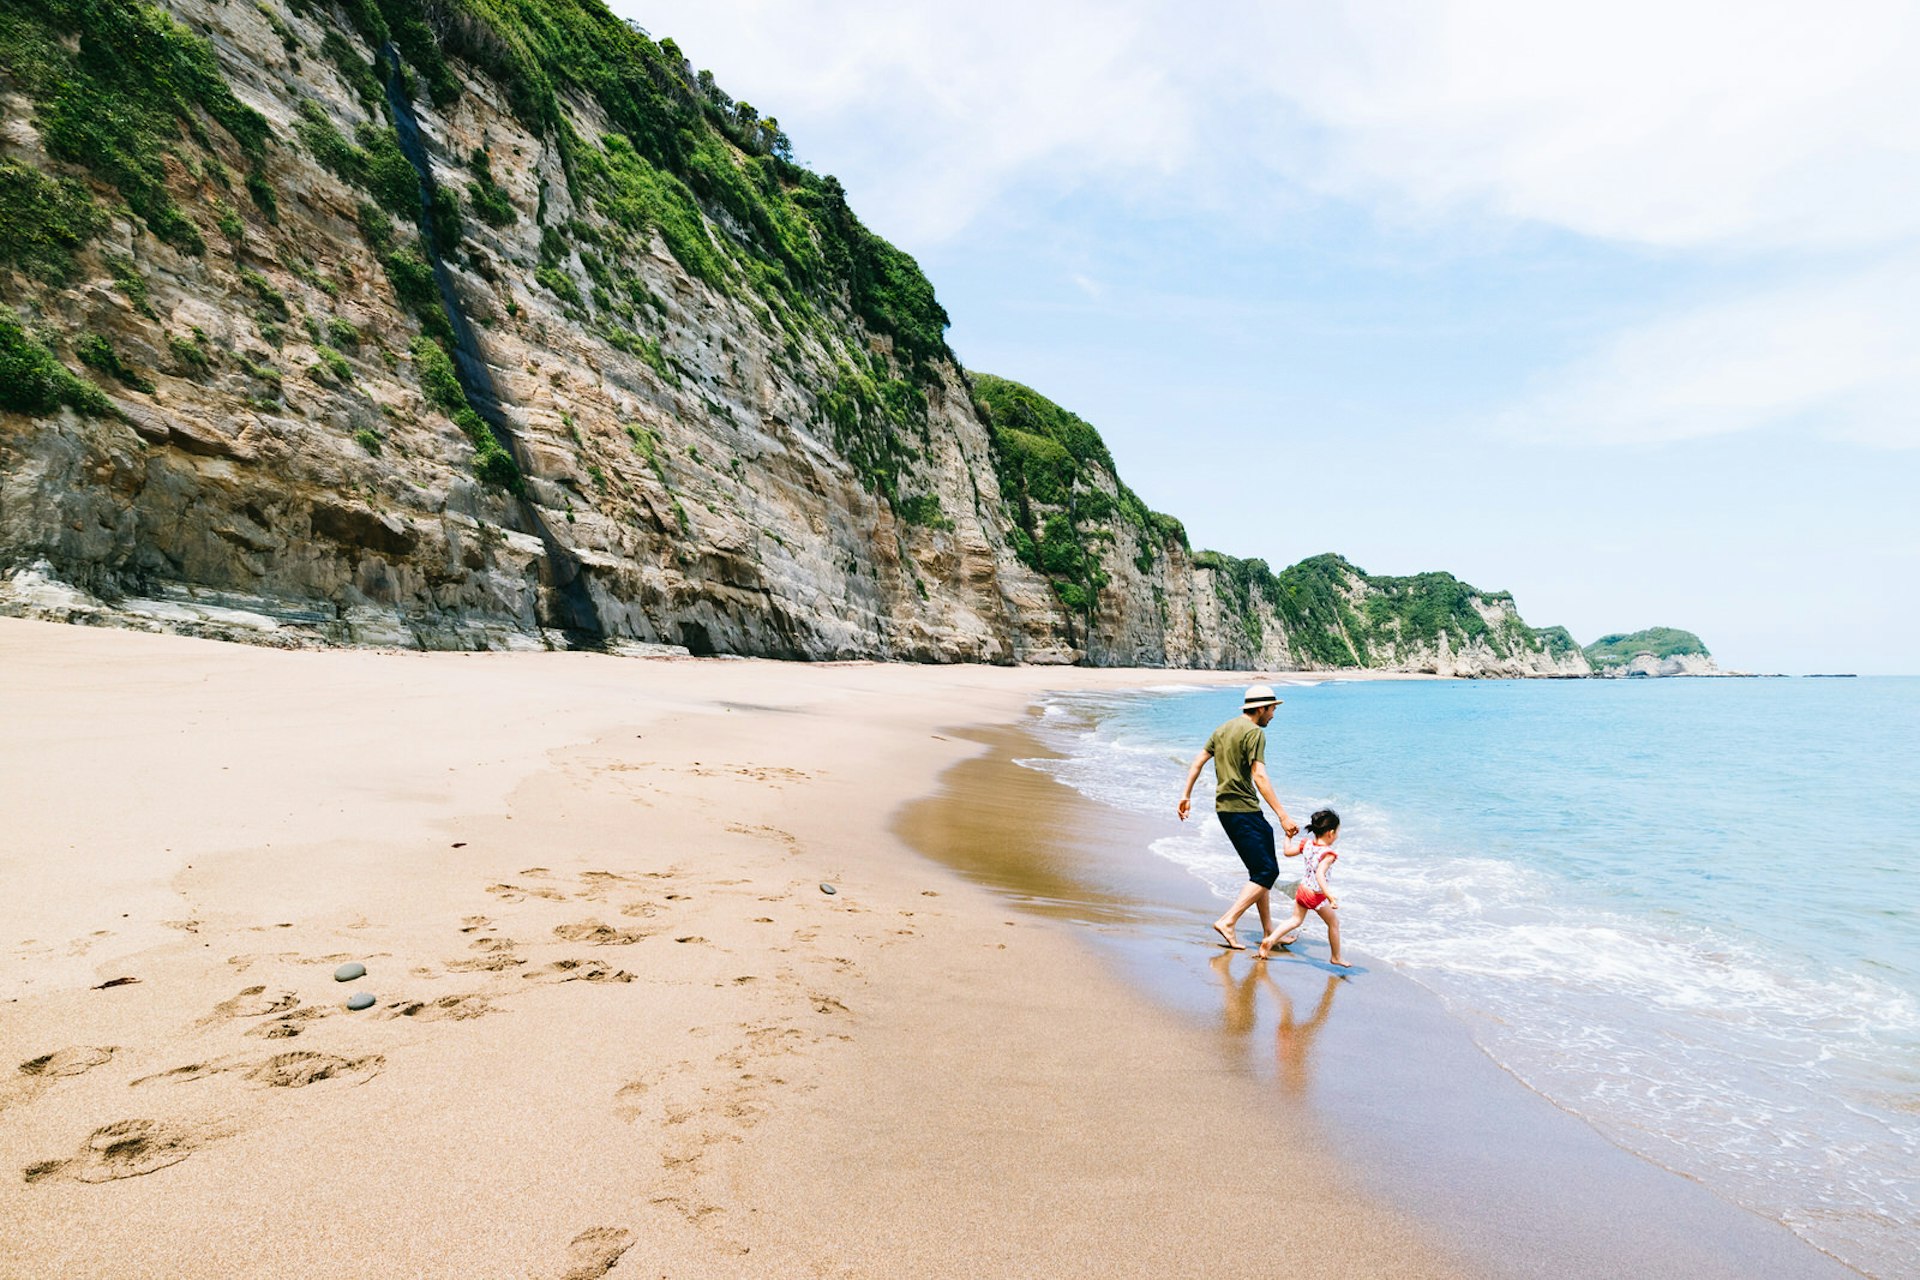 Romantic trip with kids in tow – a father and daughter walk along the coastline in Japan.